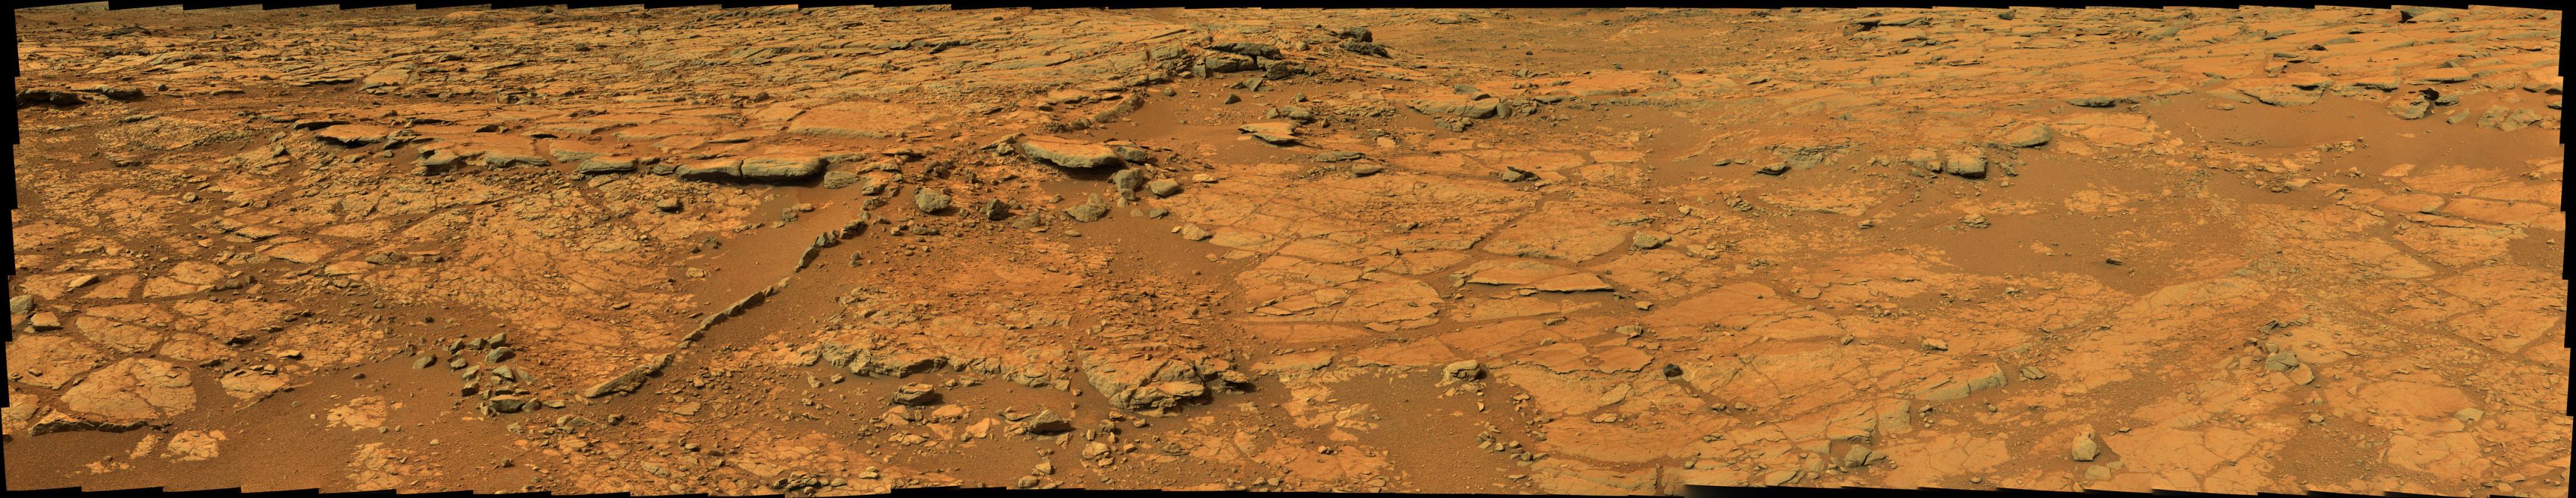 From a position in the shallow "Yellowknife Bay" depression, NASA's Mars rover Curiosity used its right Mast Camera (Mastcam) to take the telephoto images combined into this panorama of geological diversity.